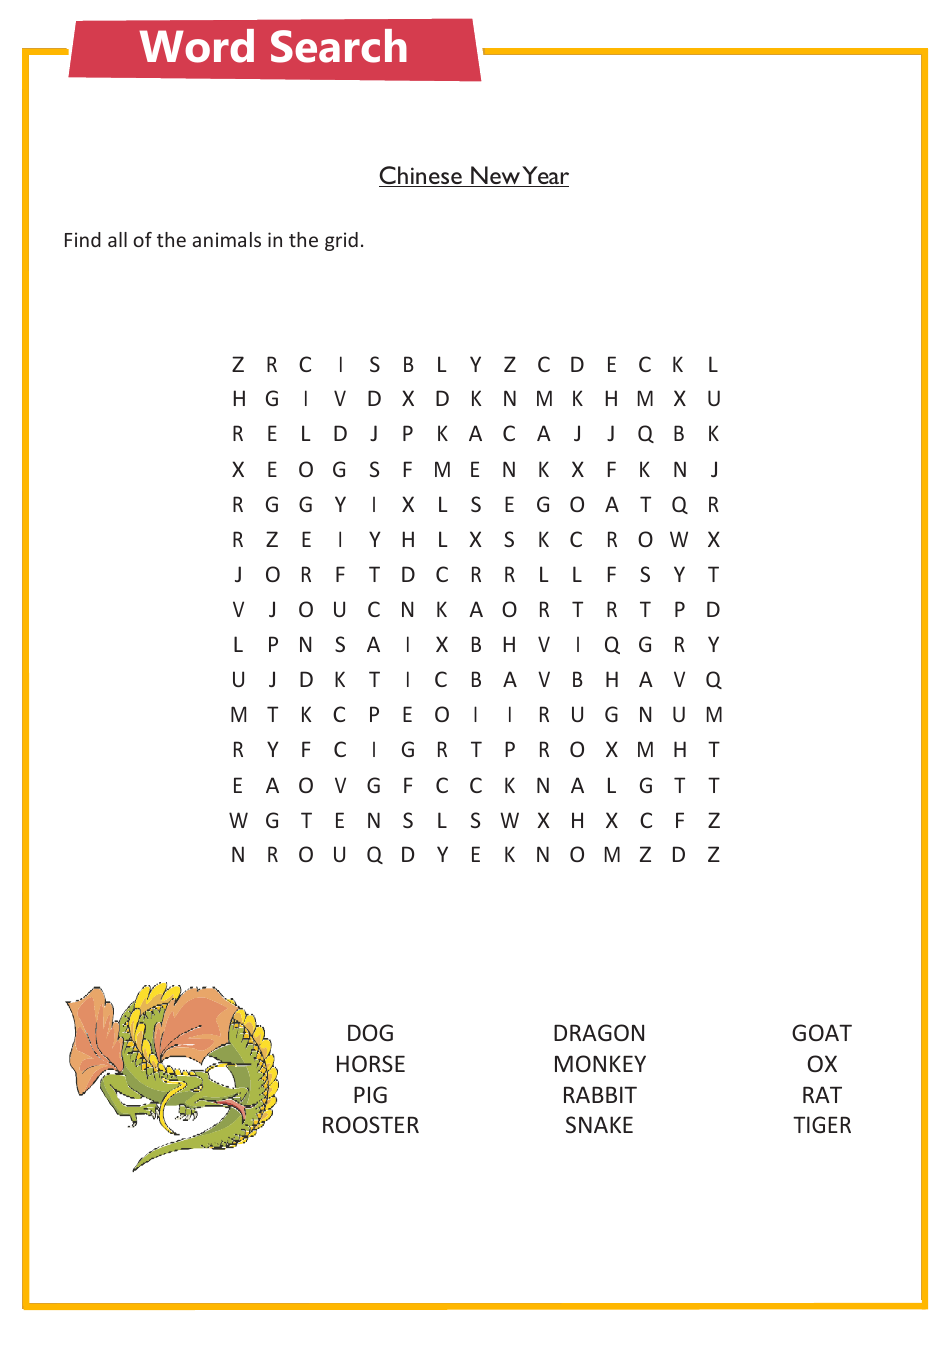 Chinese New Year word search puzzle. Find hidden Chinese New Year related words in this entertaining activity.